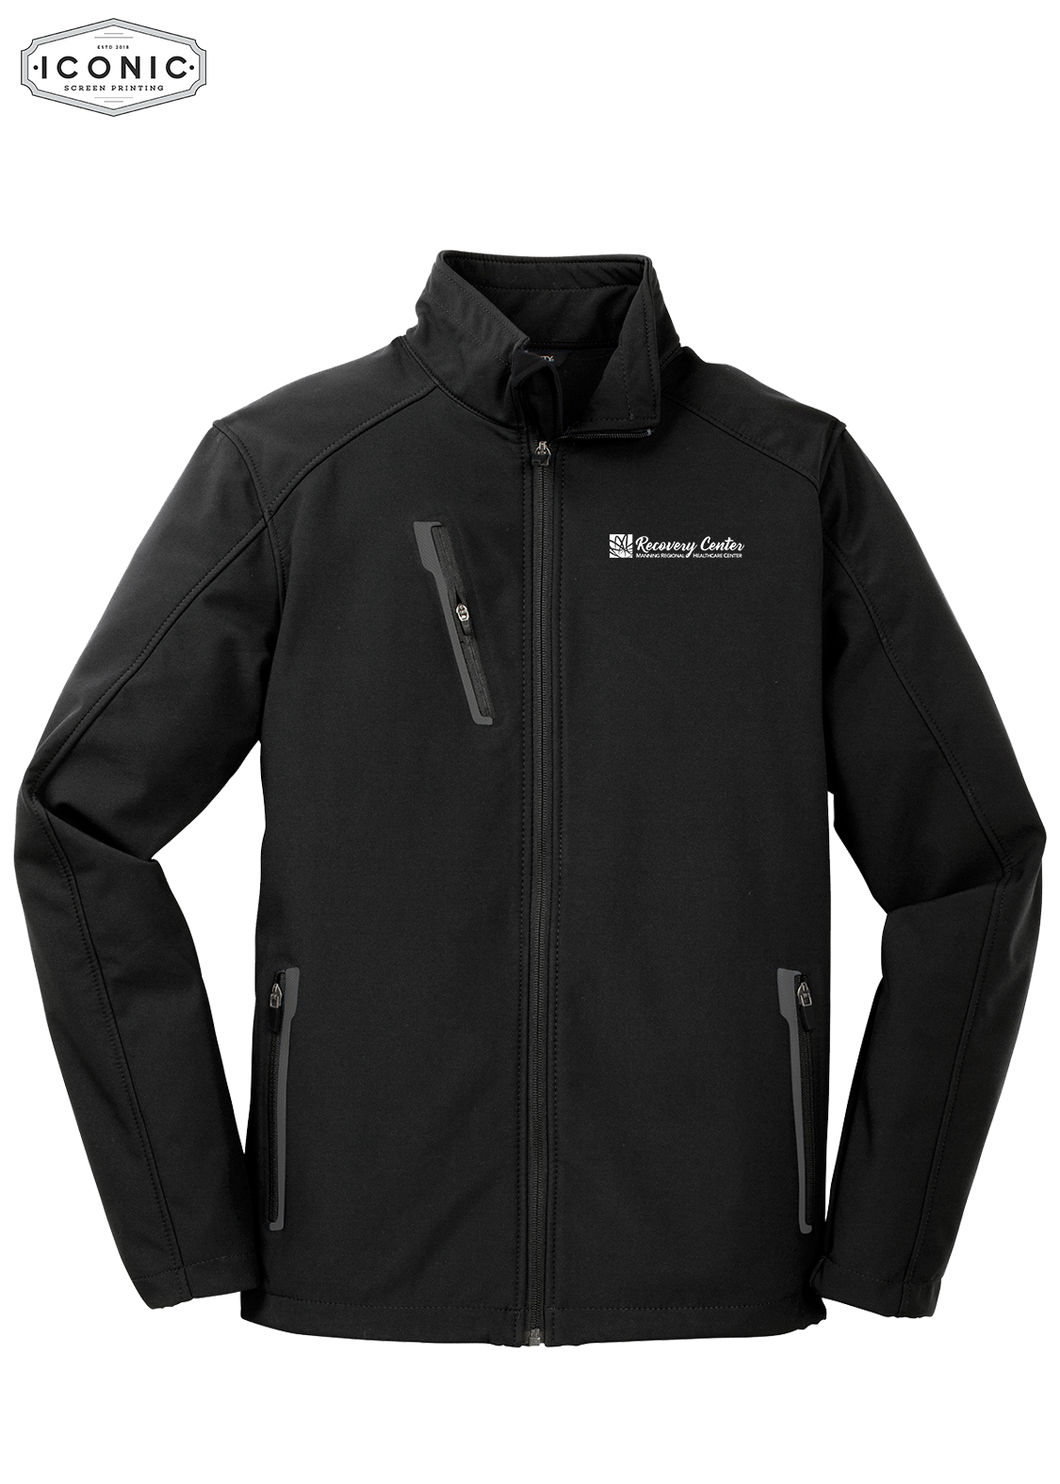 Manning Regional Healthcare - Welded Soft Shell Jacket - embroidery